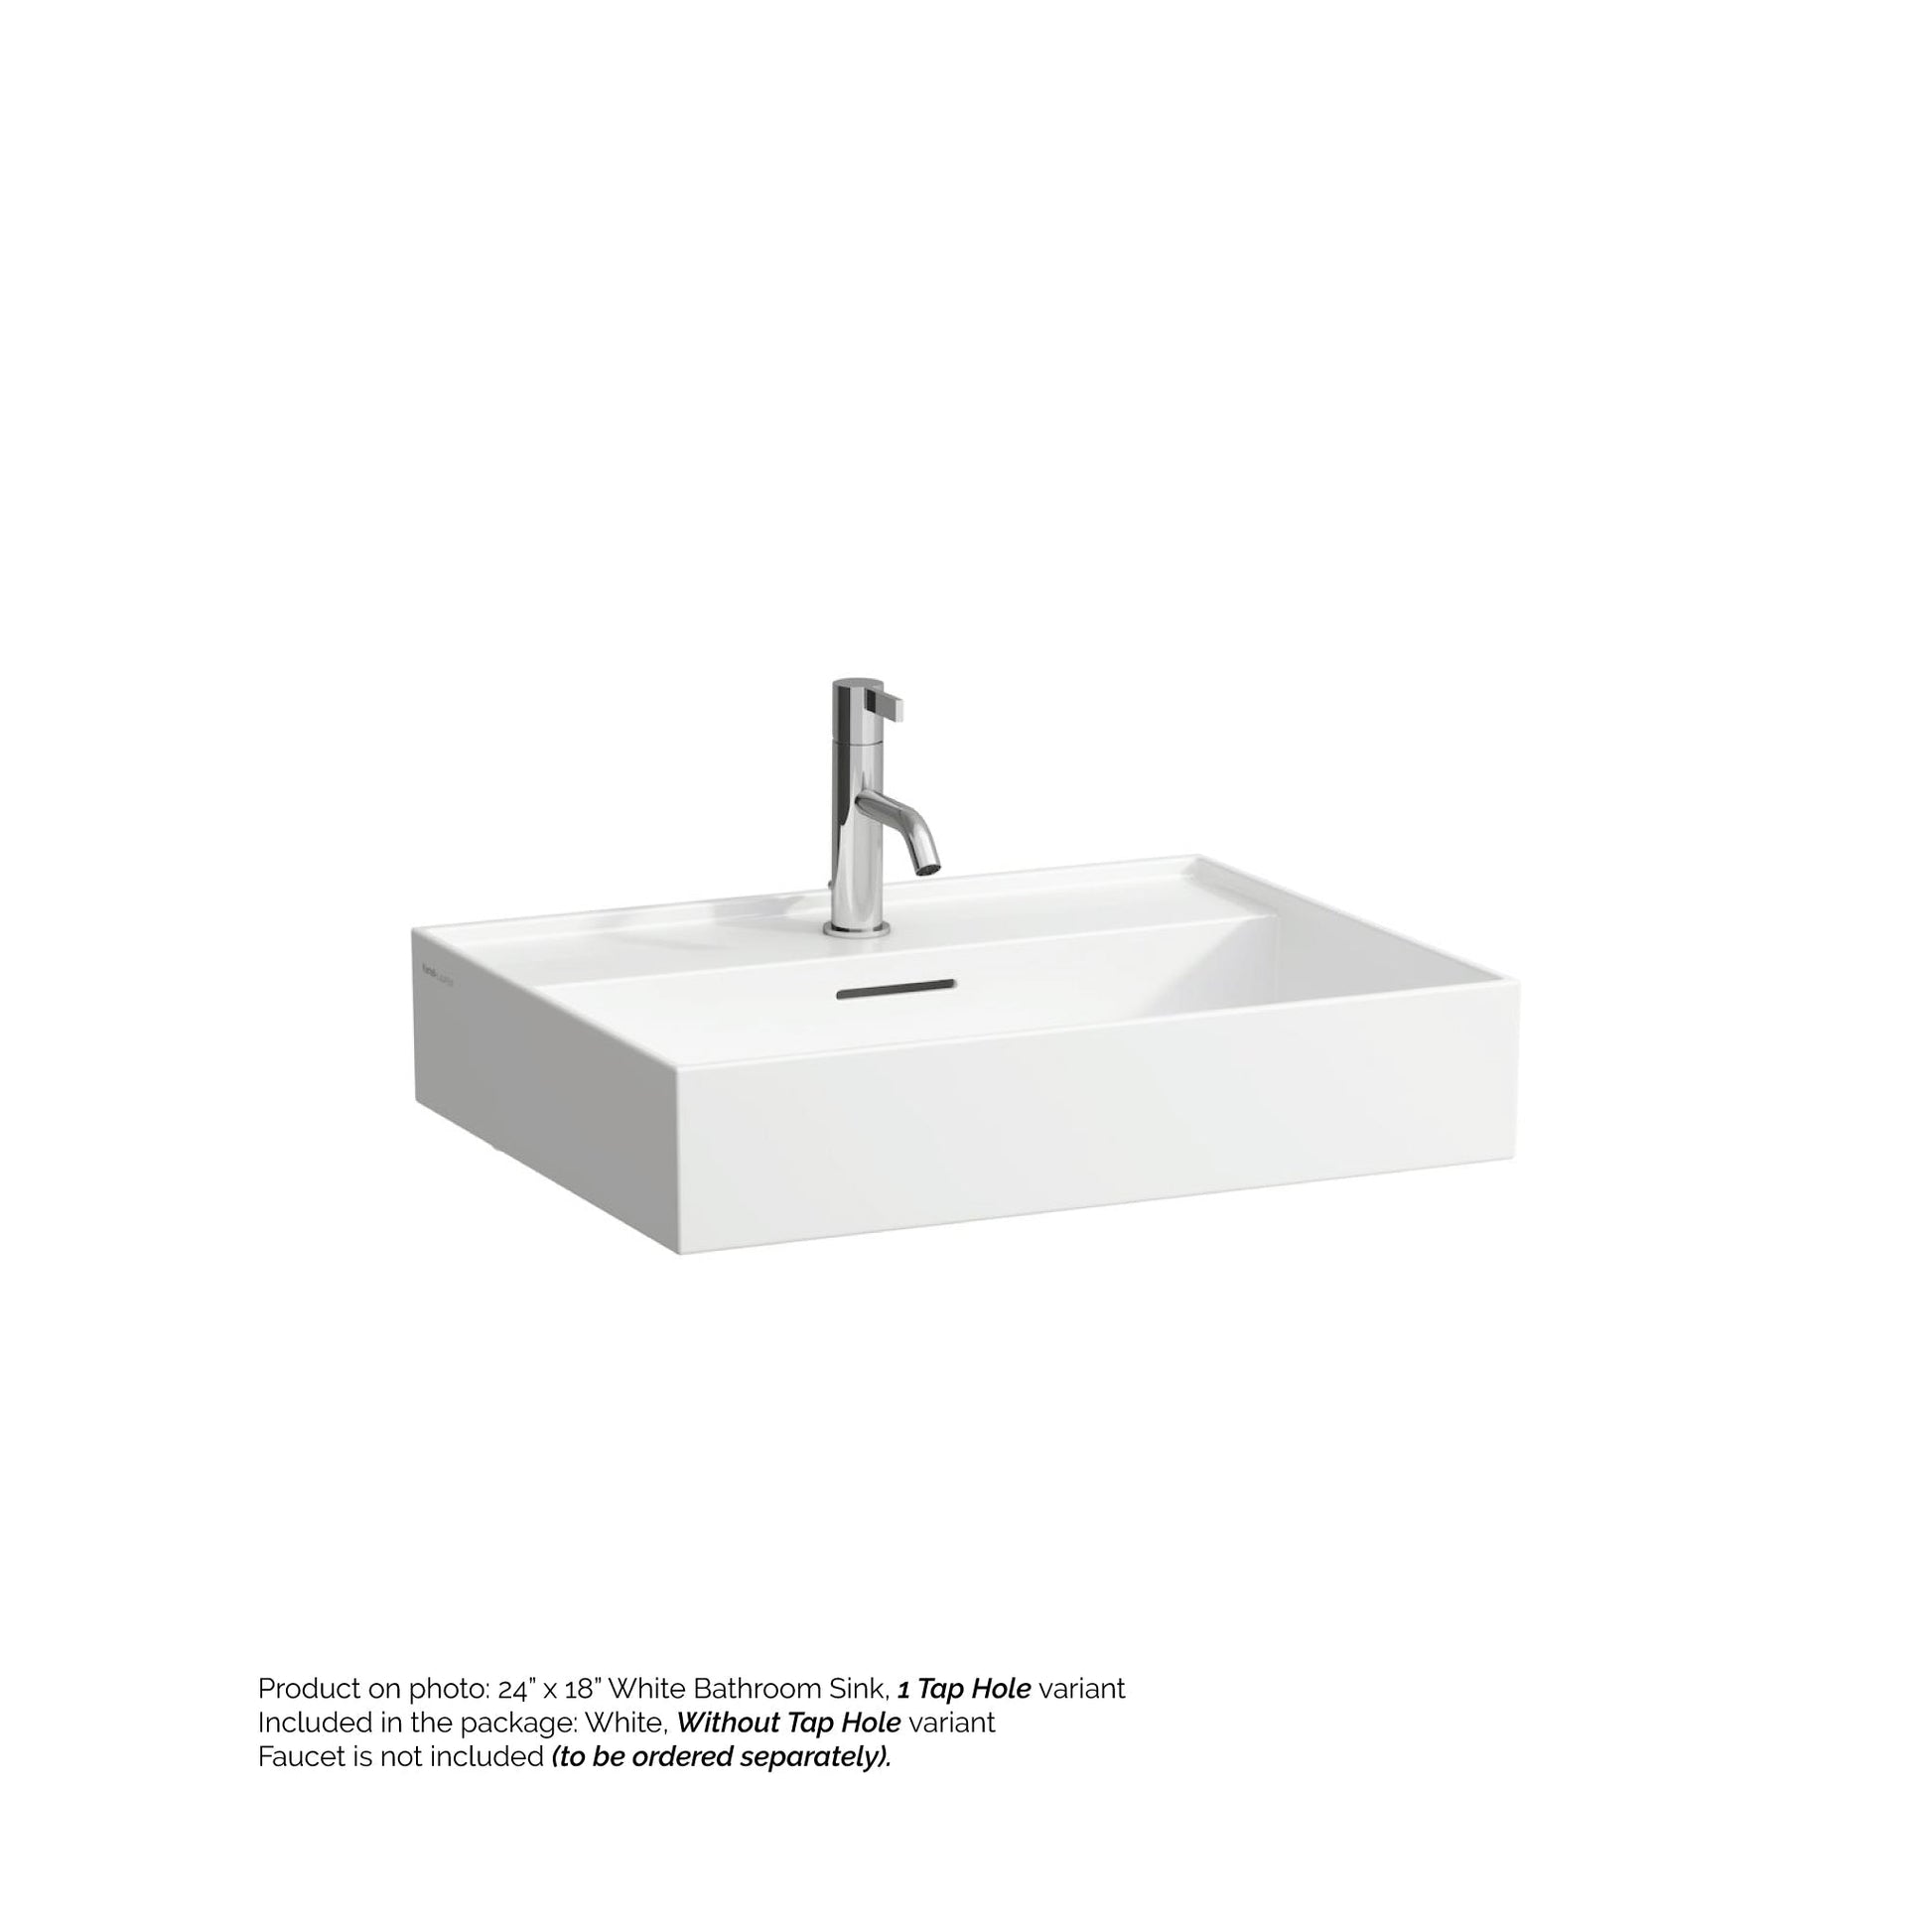 Laufen Kartell 24" x 18" White Wall-Mounted Bathroom Sink Without Faucet Hole